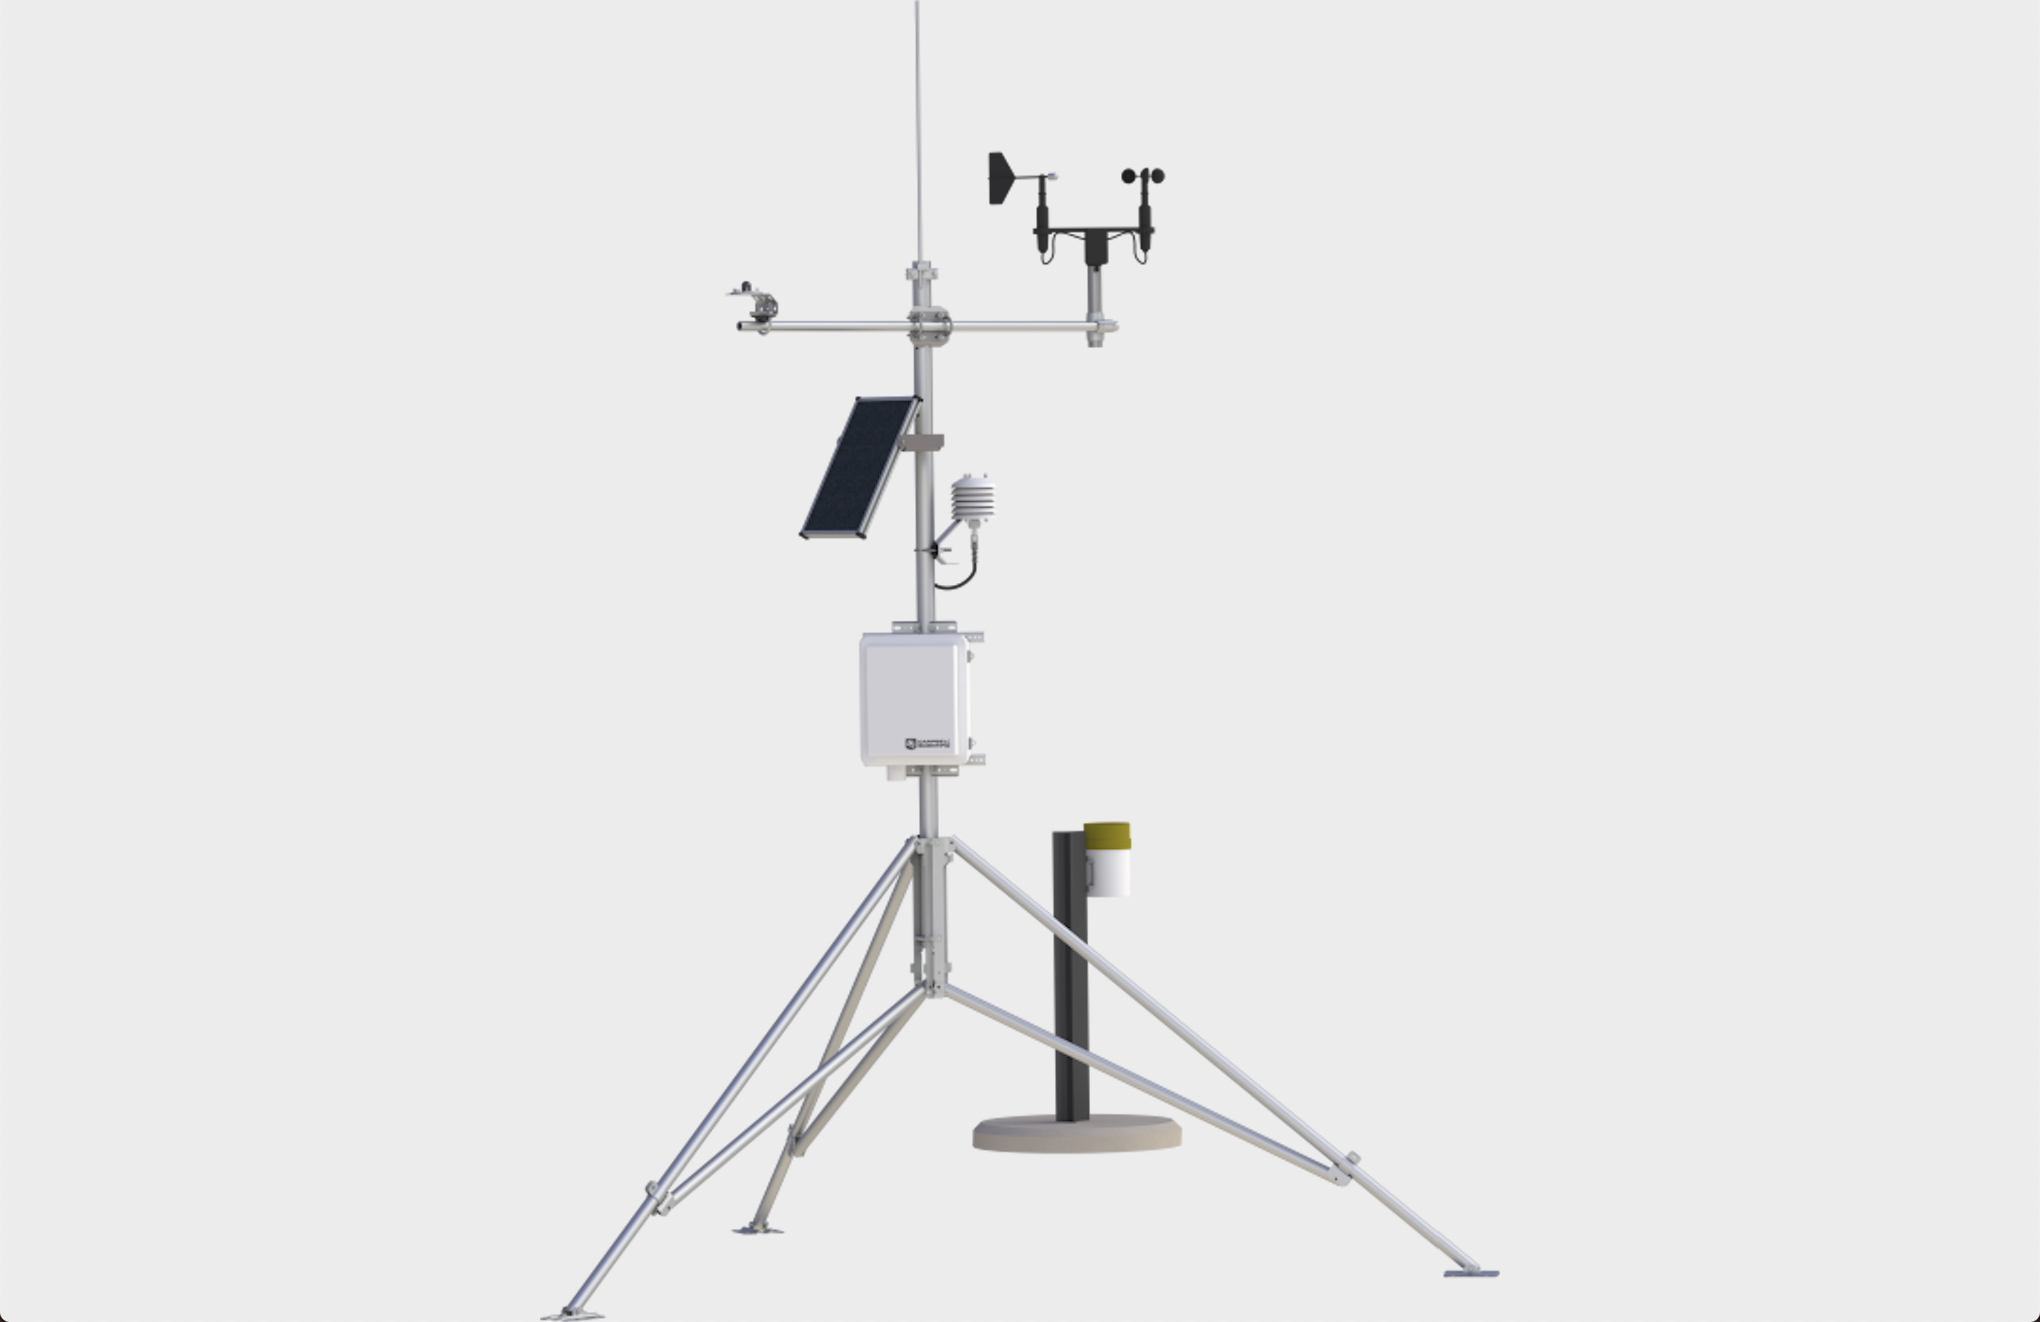 Automated weather station